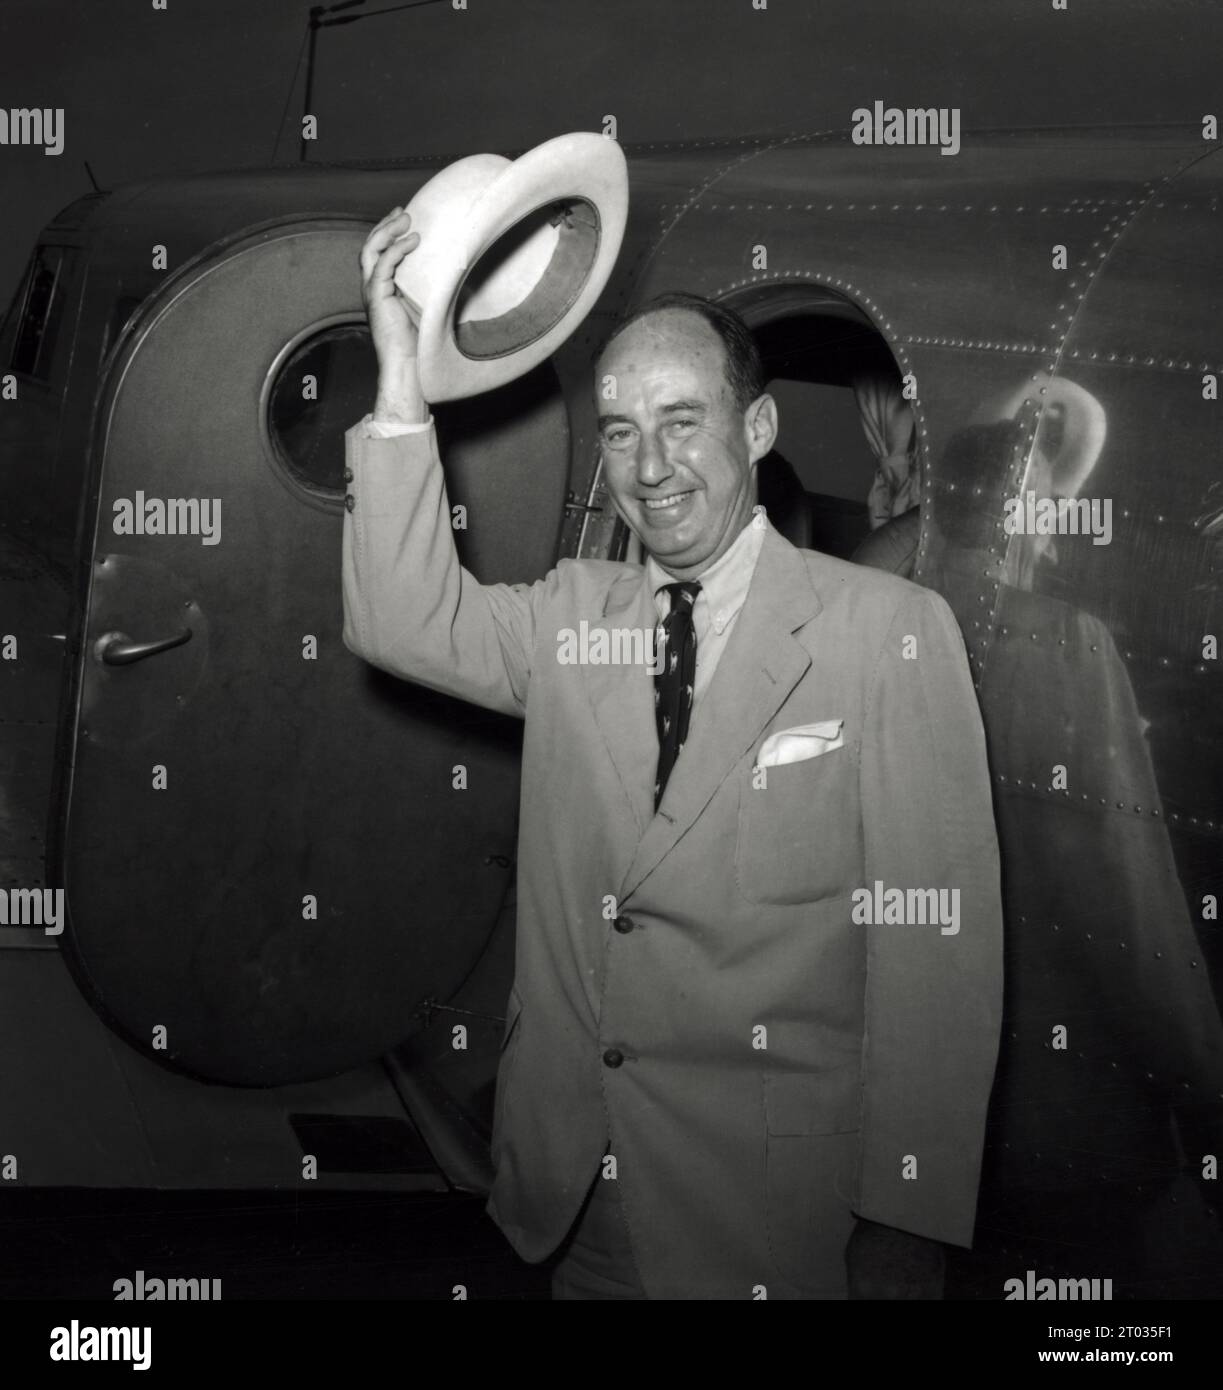 Presidential nominee Adlai Stevenson at the Democratic National Convention, 1952 Stock Photo